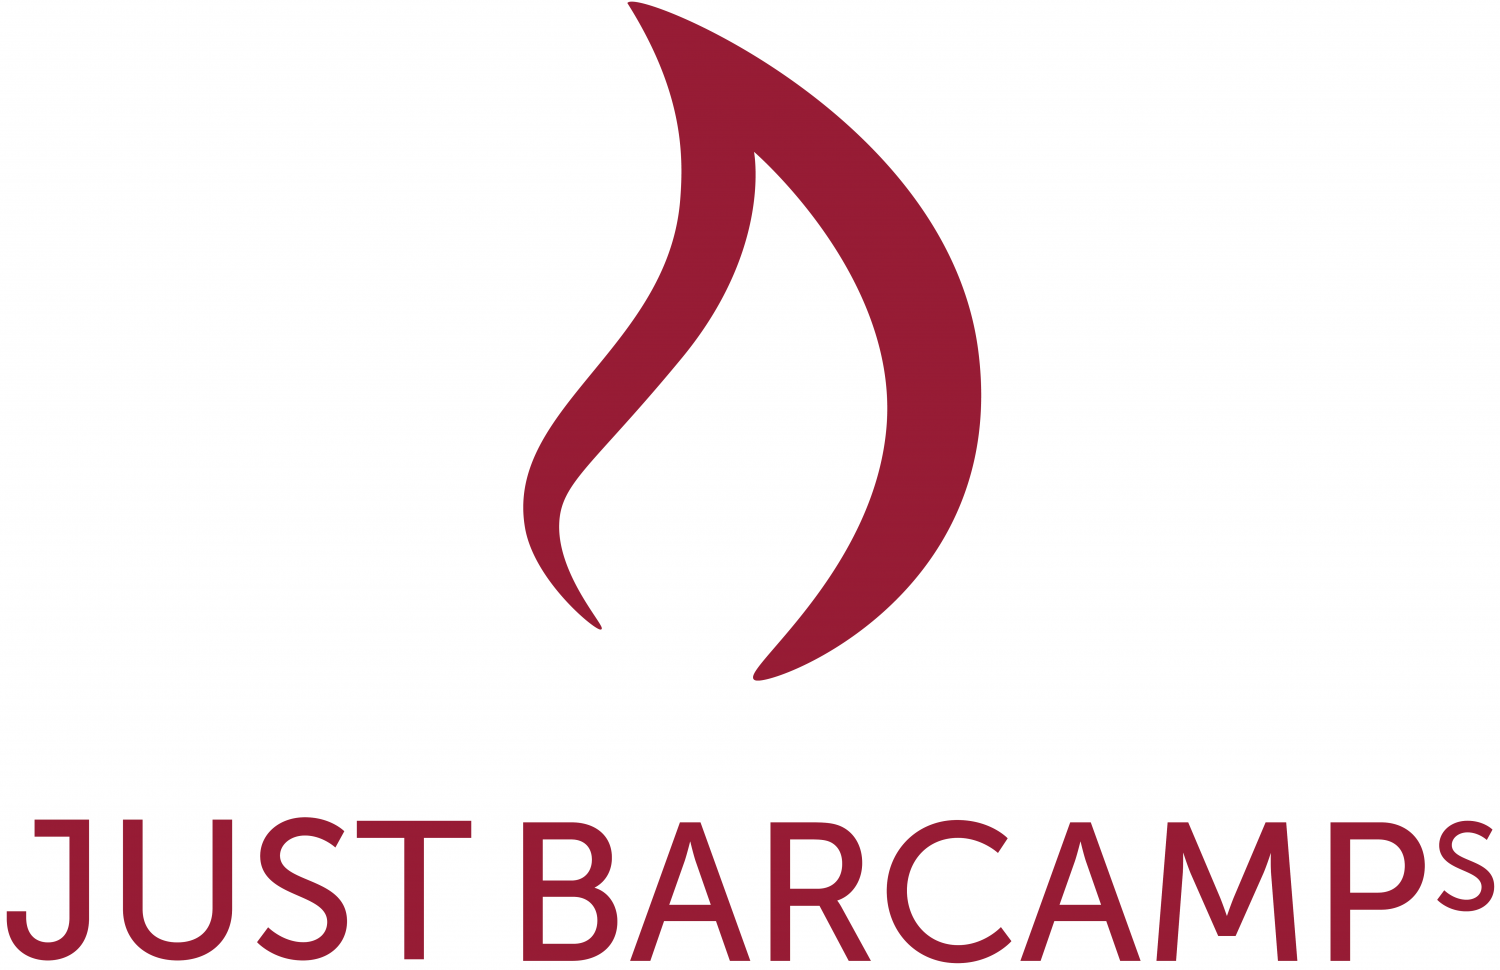 Just Barcamps